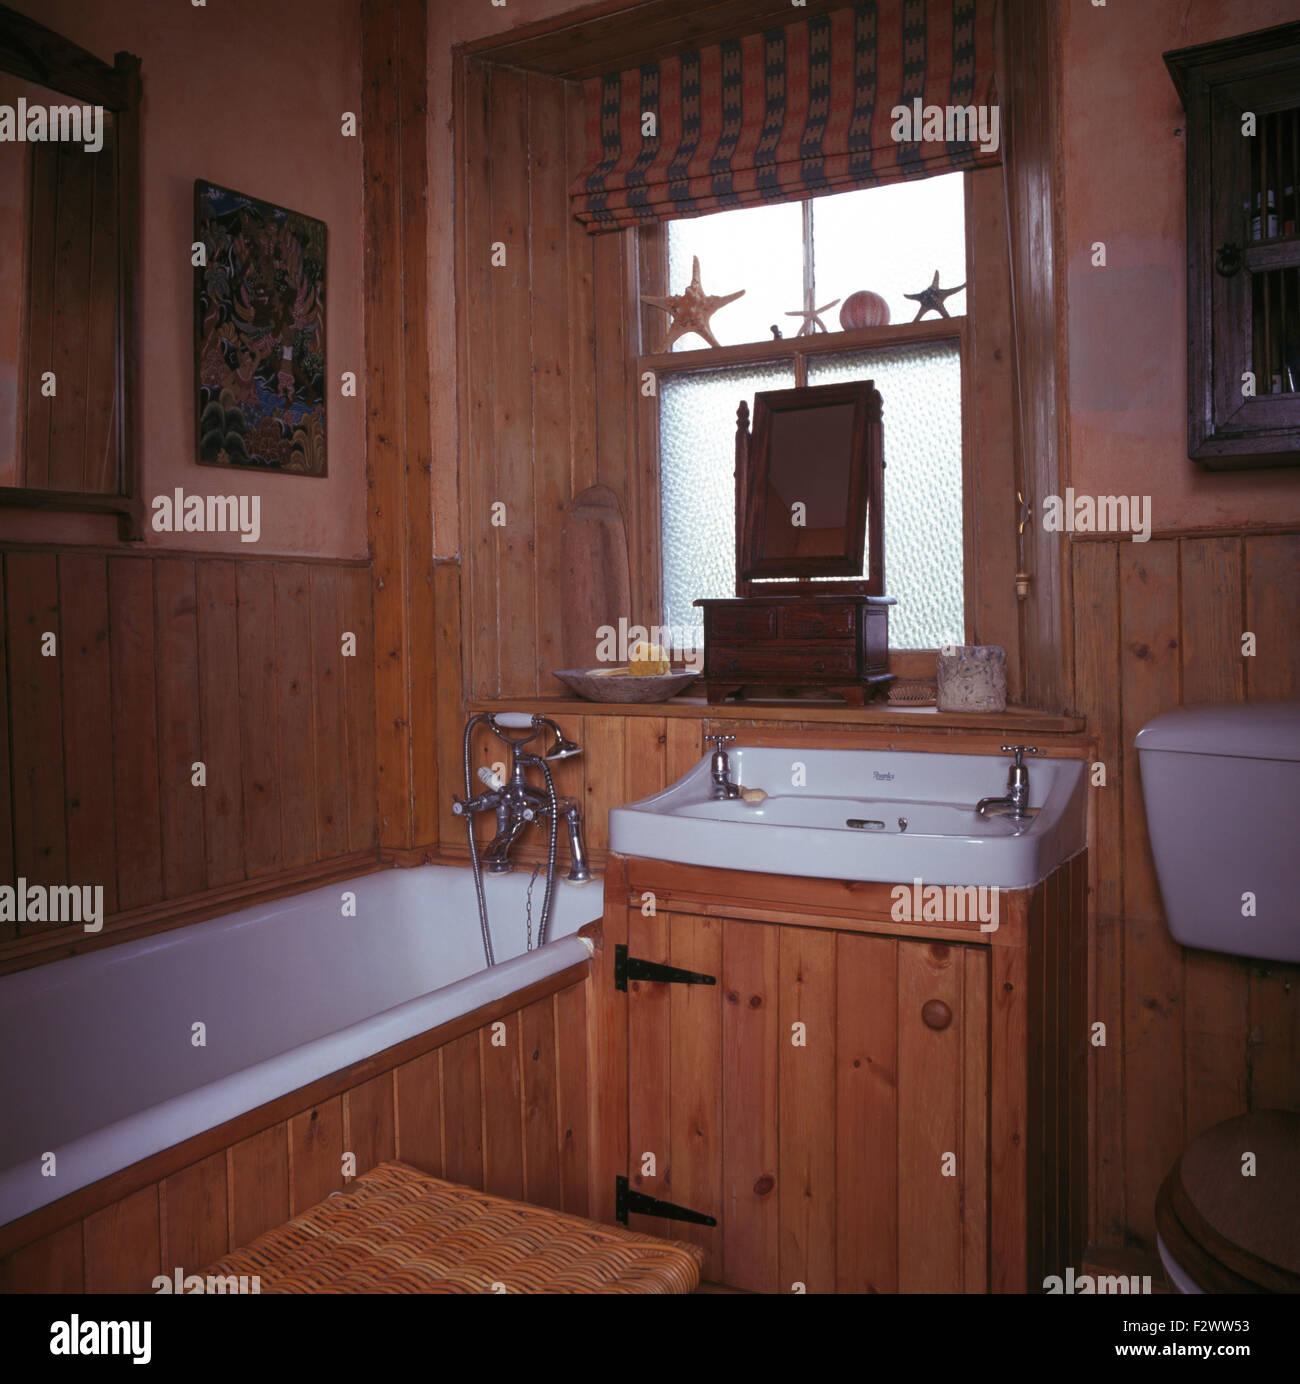 Blind on frosted window above basin in pine vanity unit in pine panelled nineties bathroom Stock Photo